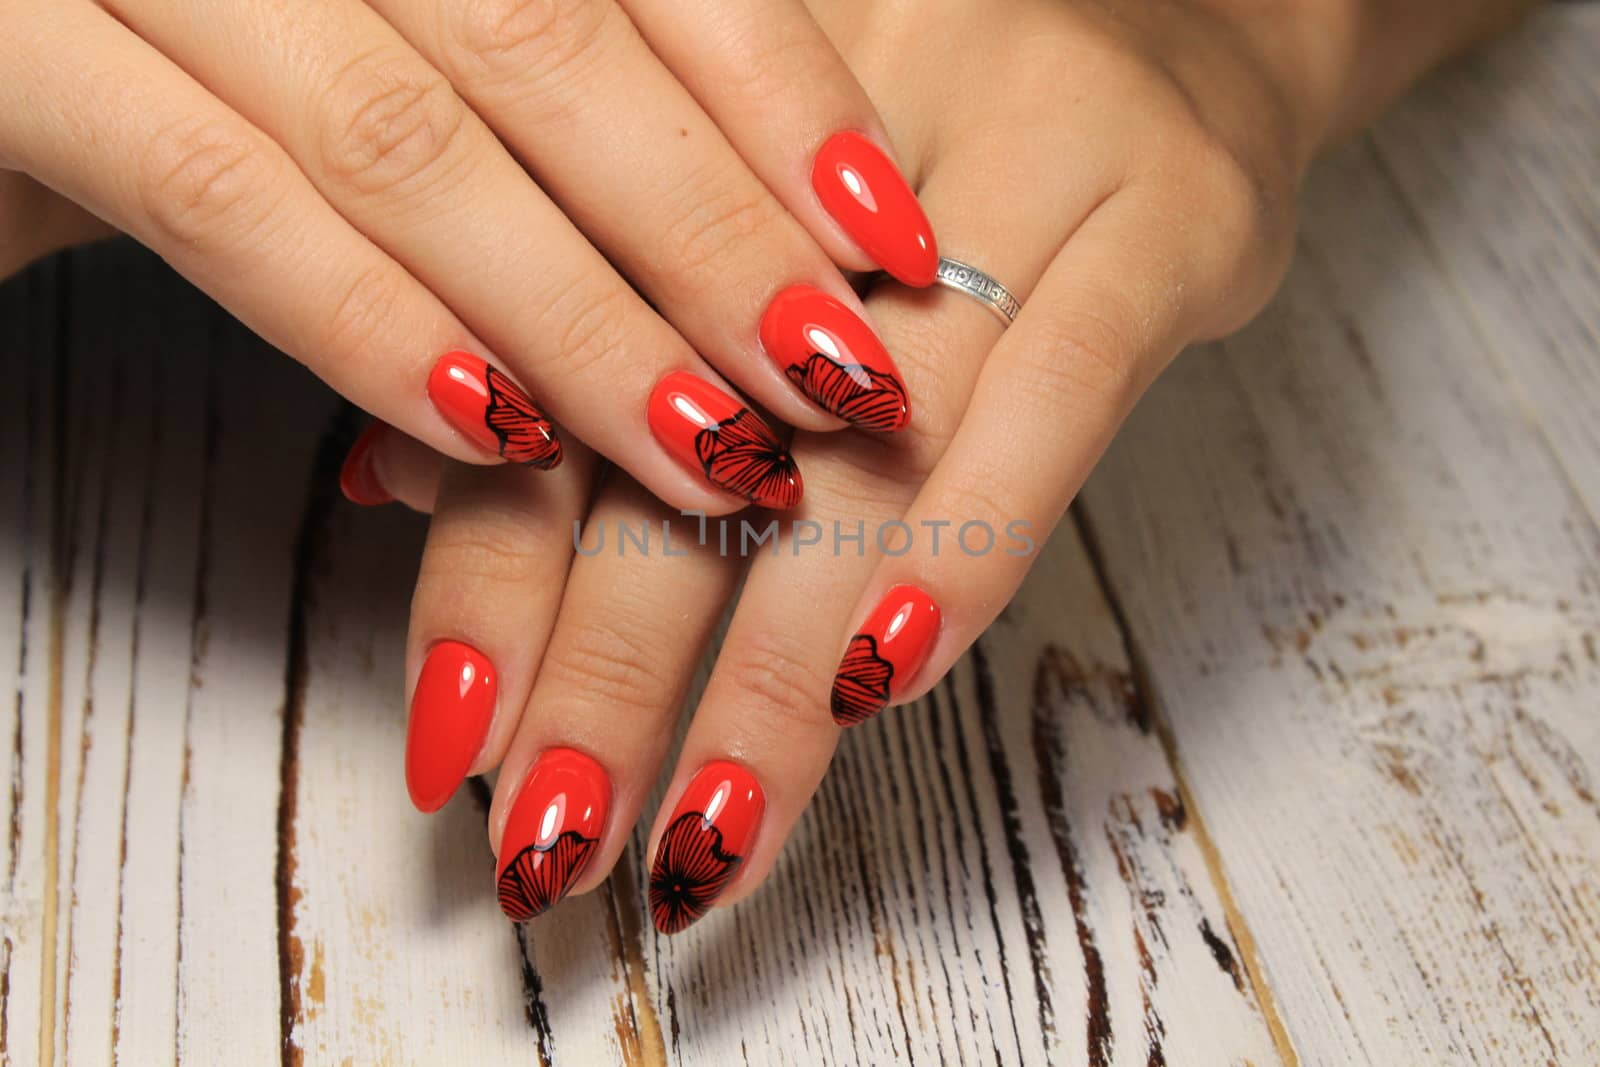 Steep and very stylish design of manicure by SmirMaxStock